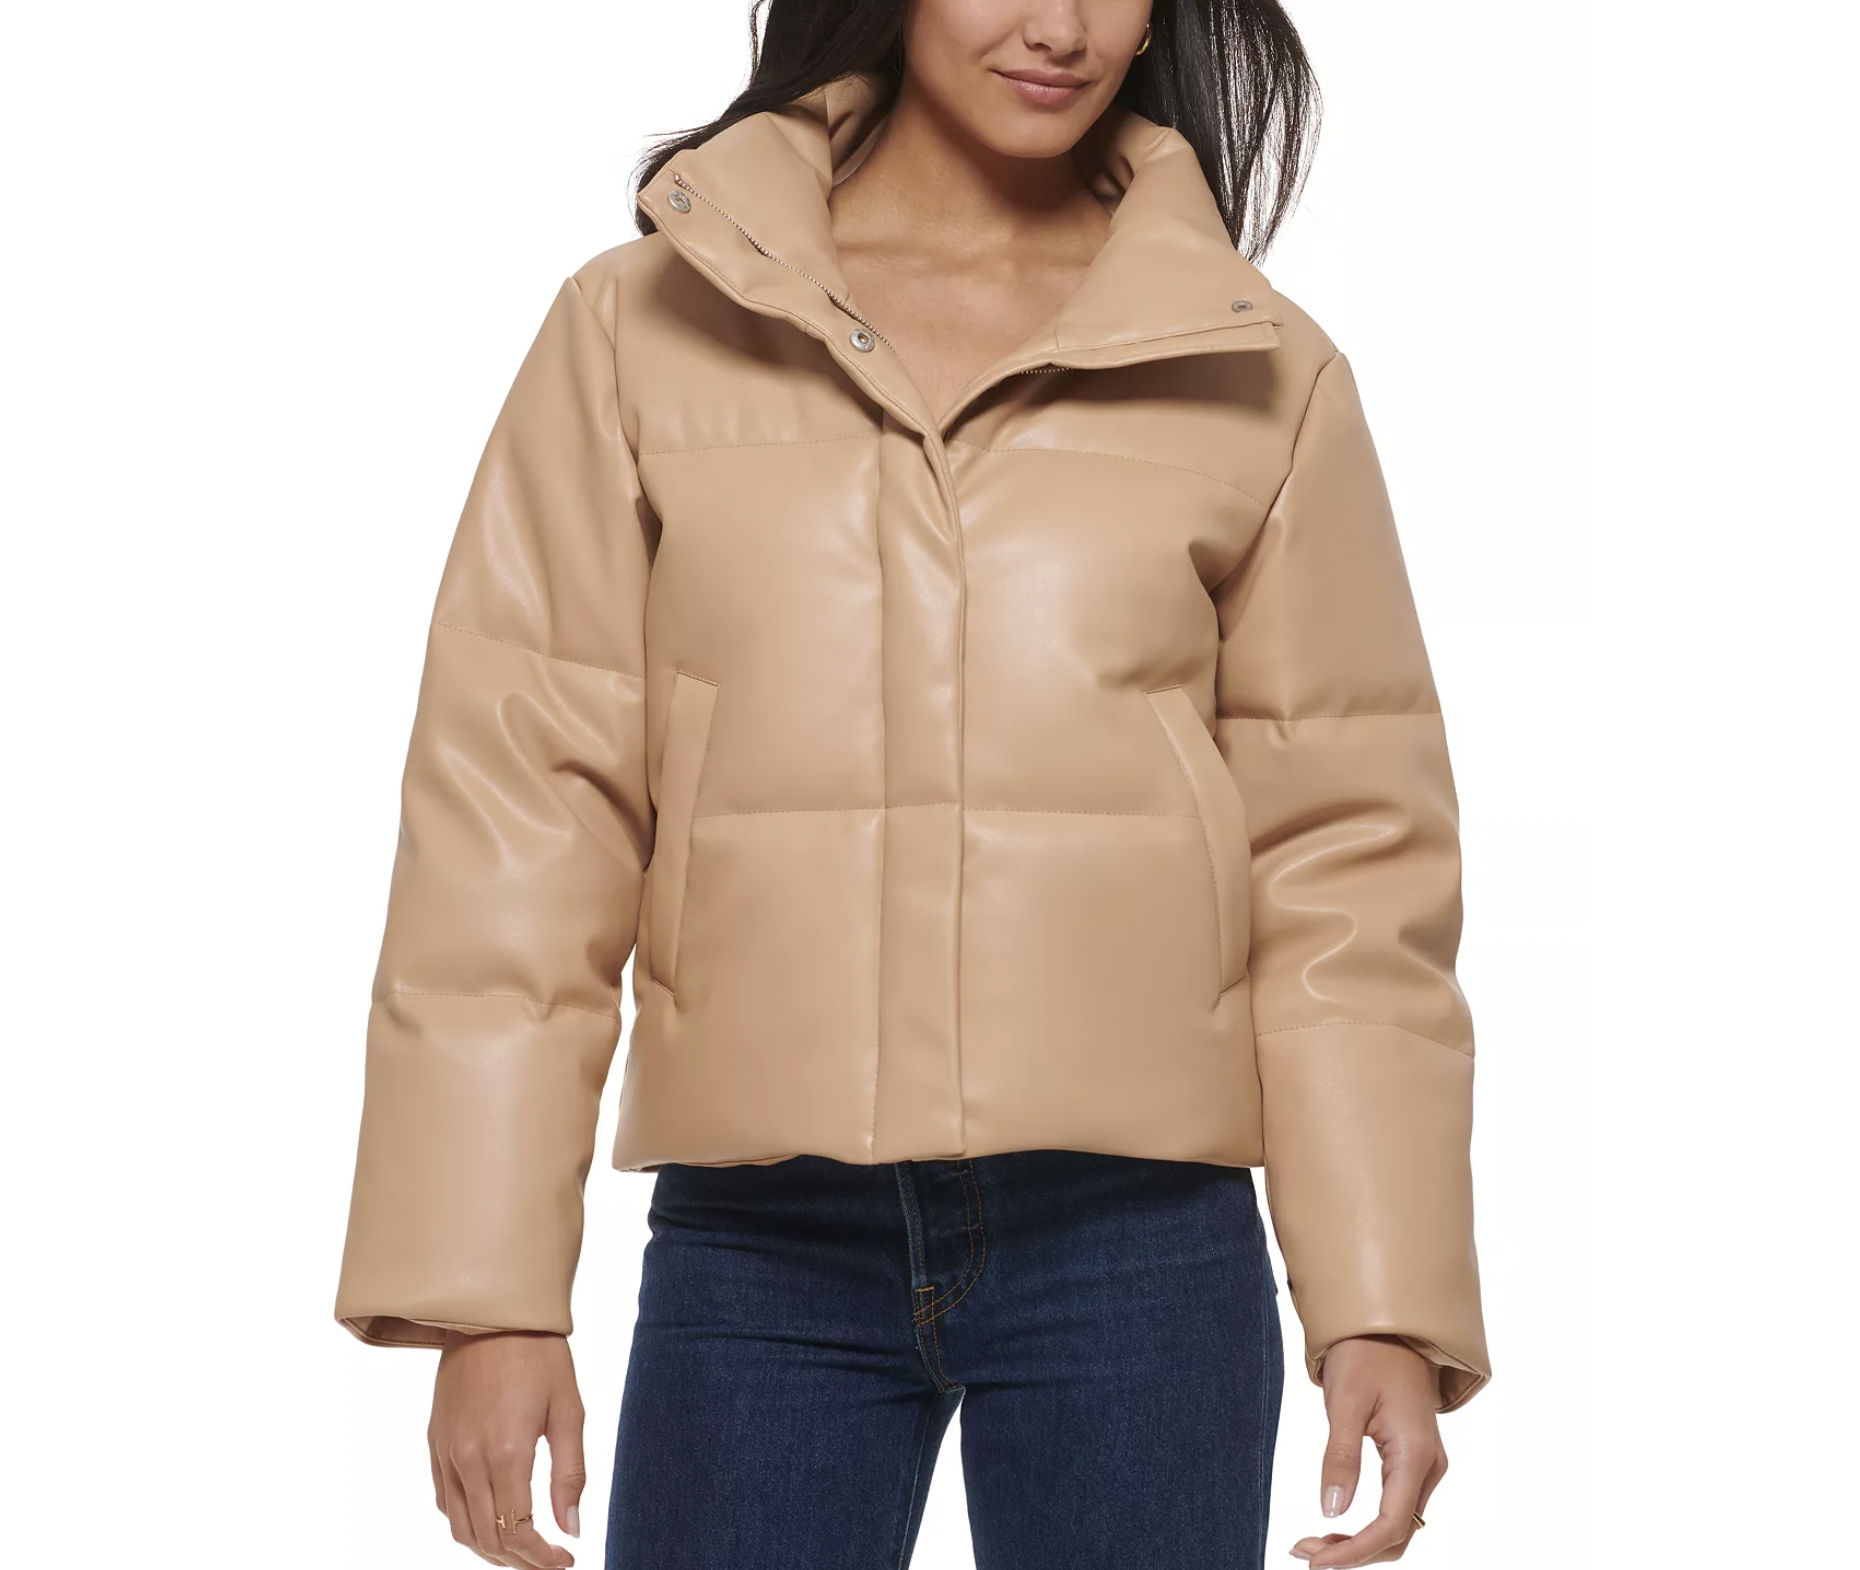 Levis Cropped Faux leather puffer